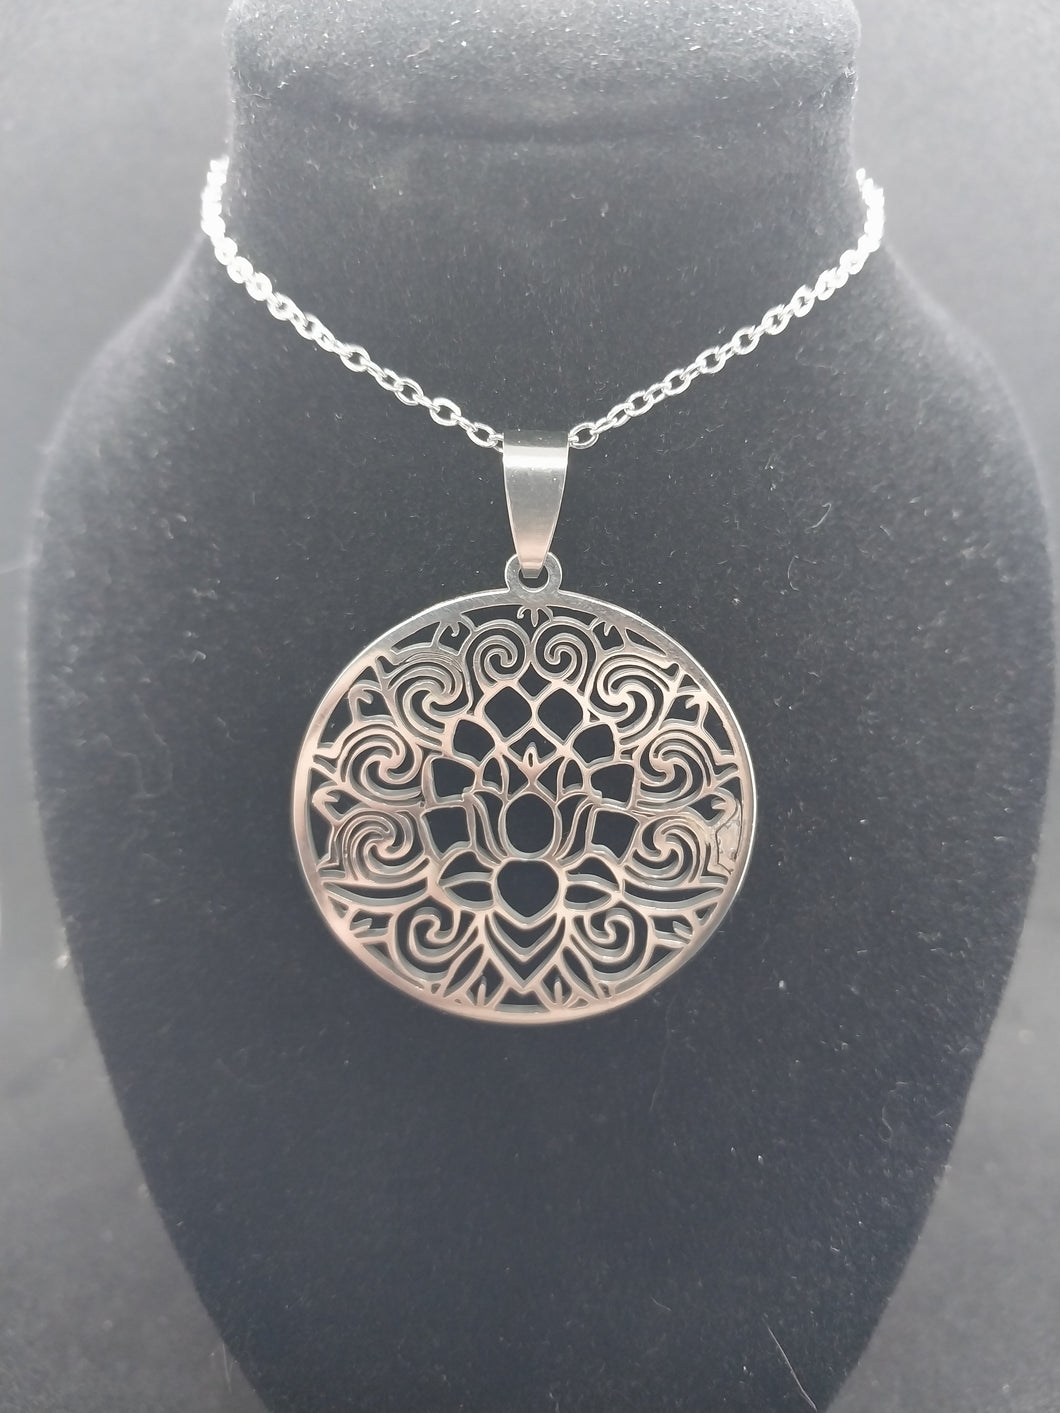 Stainless Steel Lotus Flower Of Life Pendant Necklace